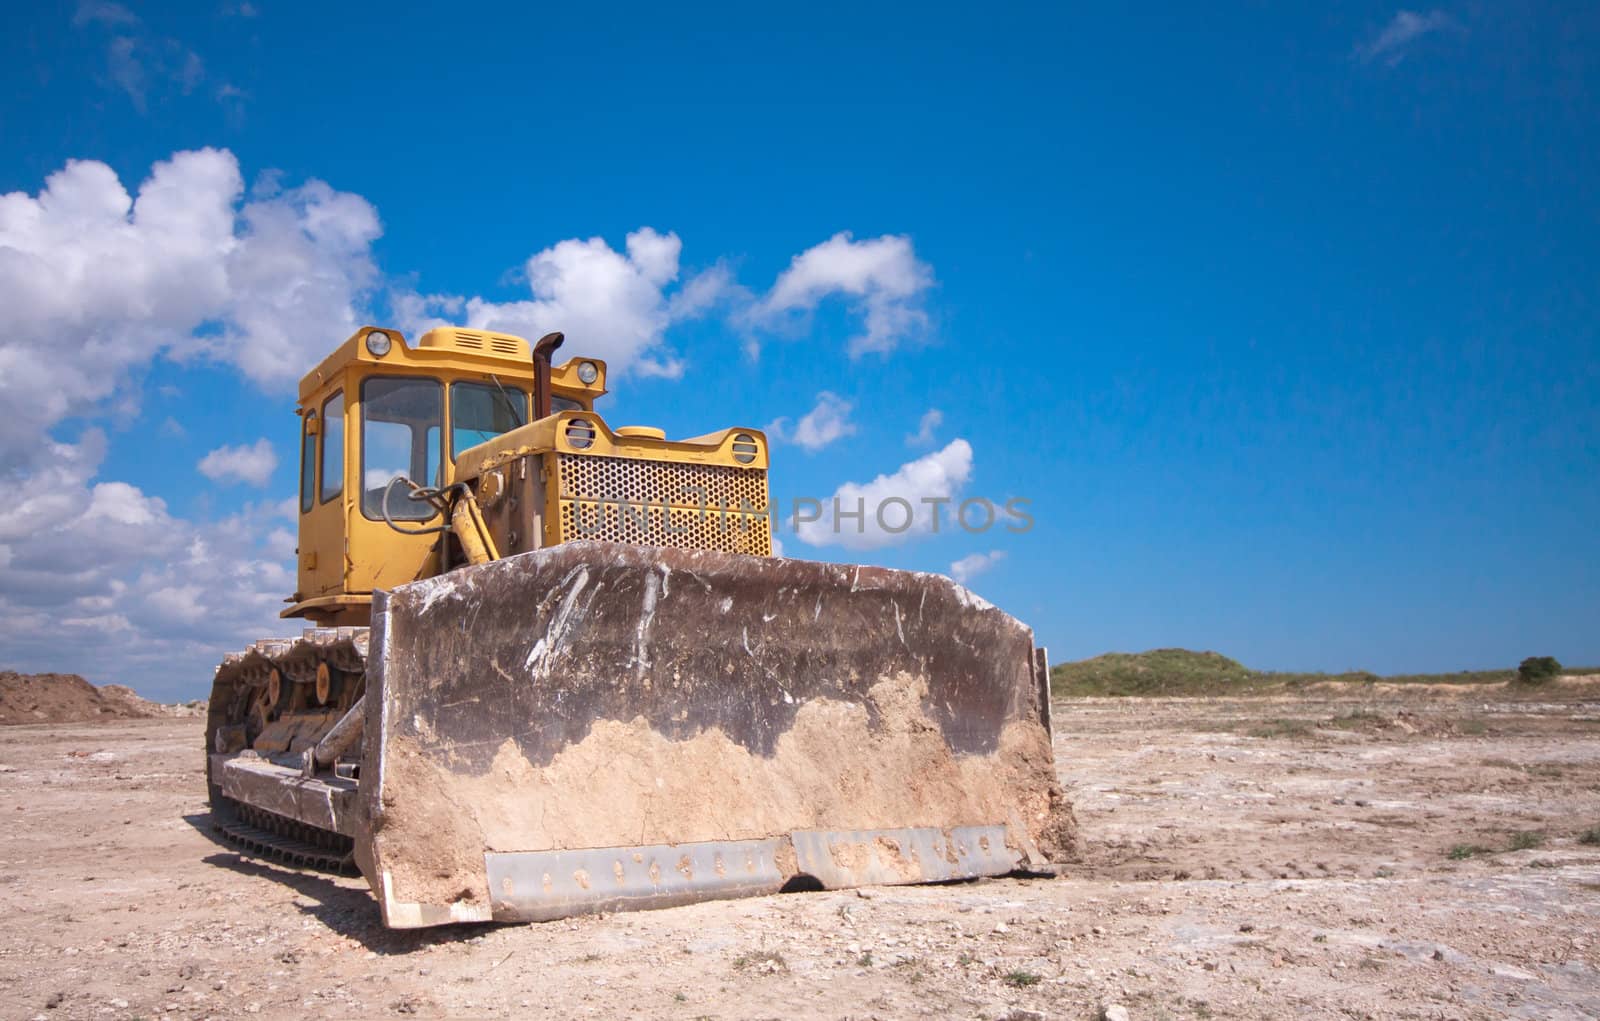 orange bulldozer after the work is on a background of blue sky